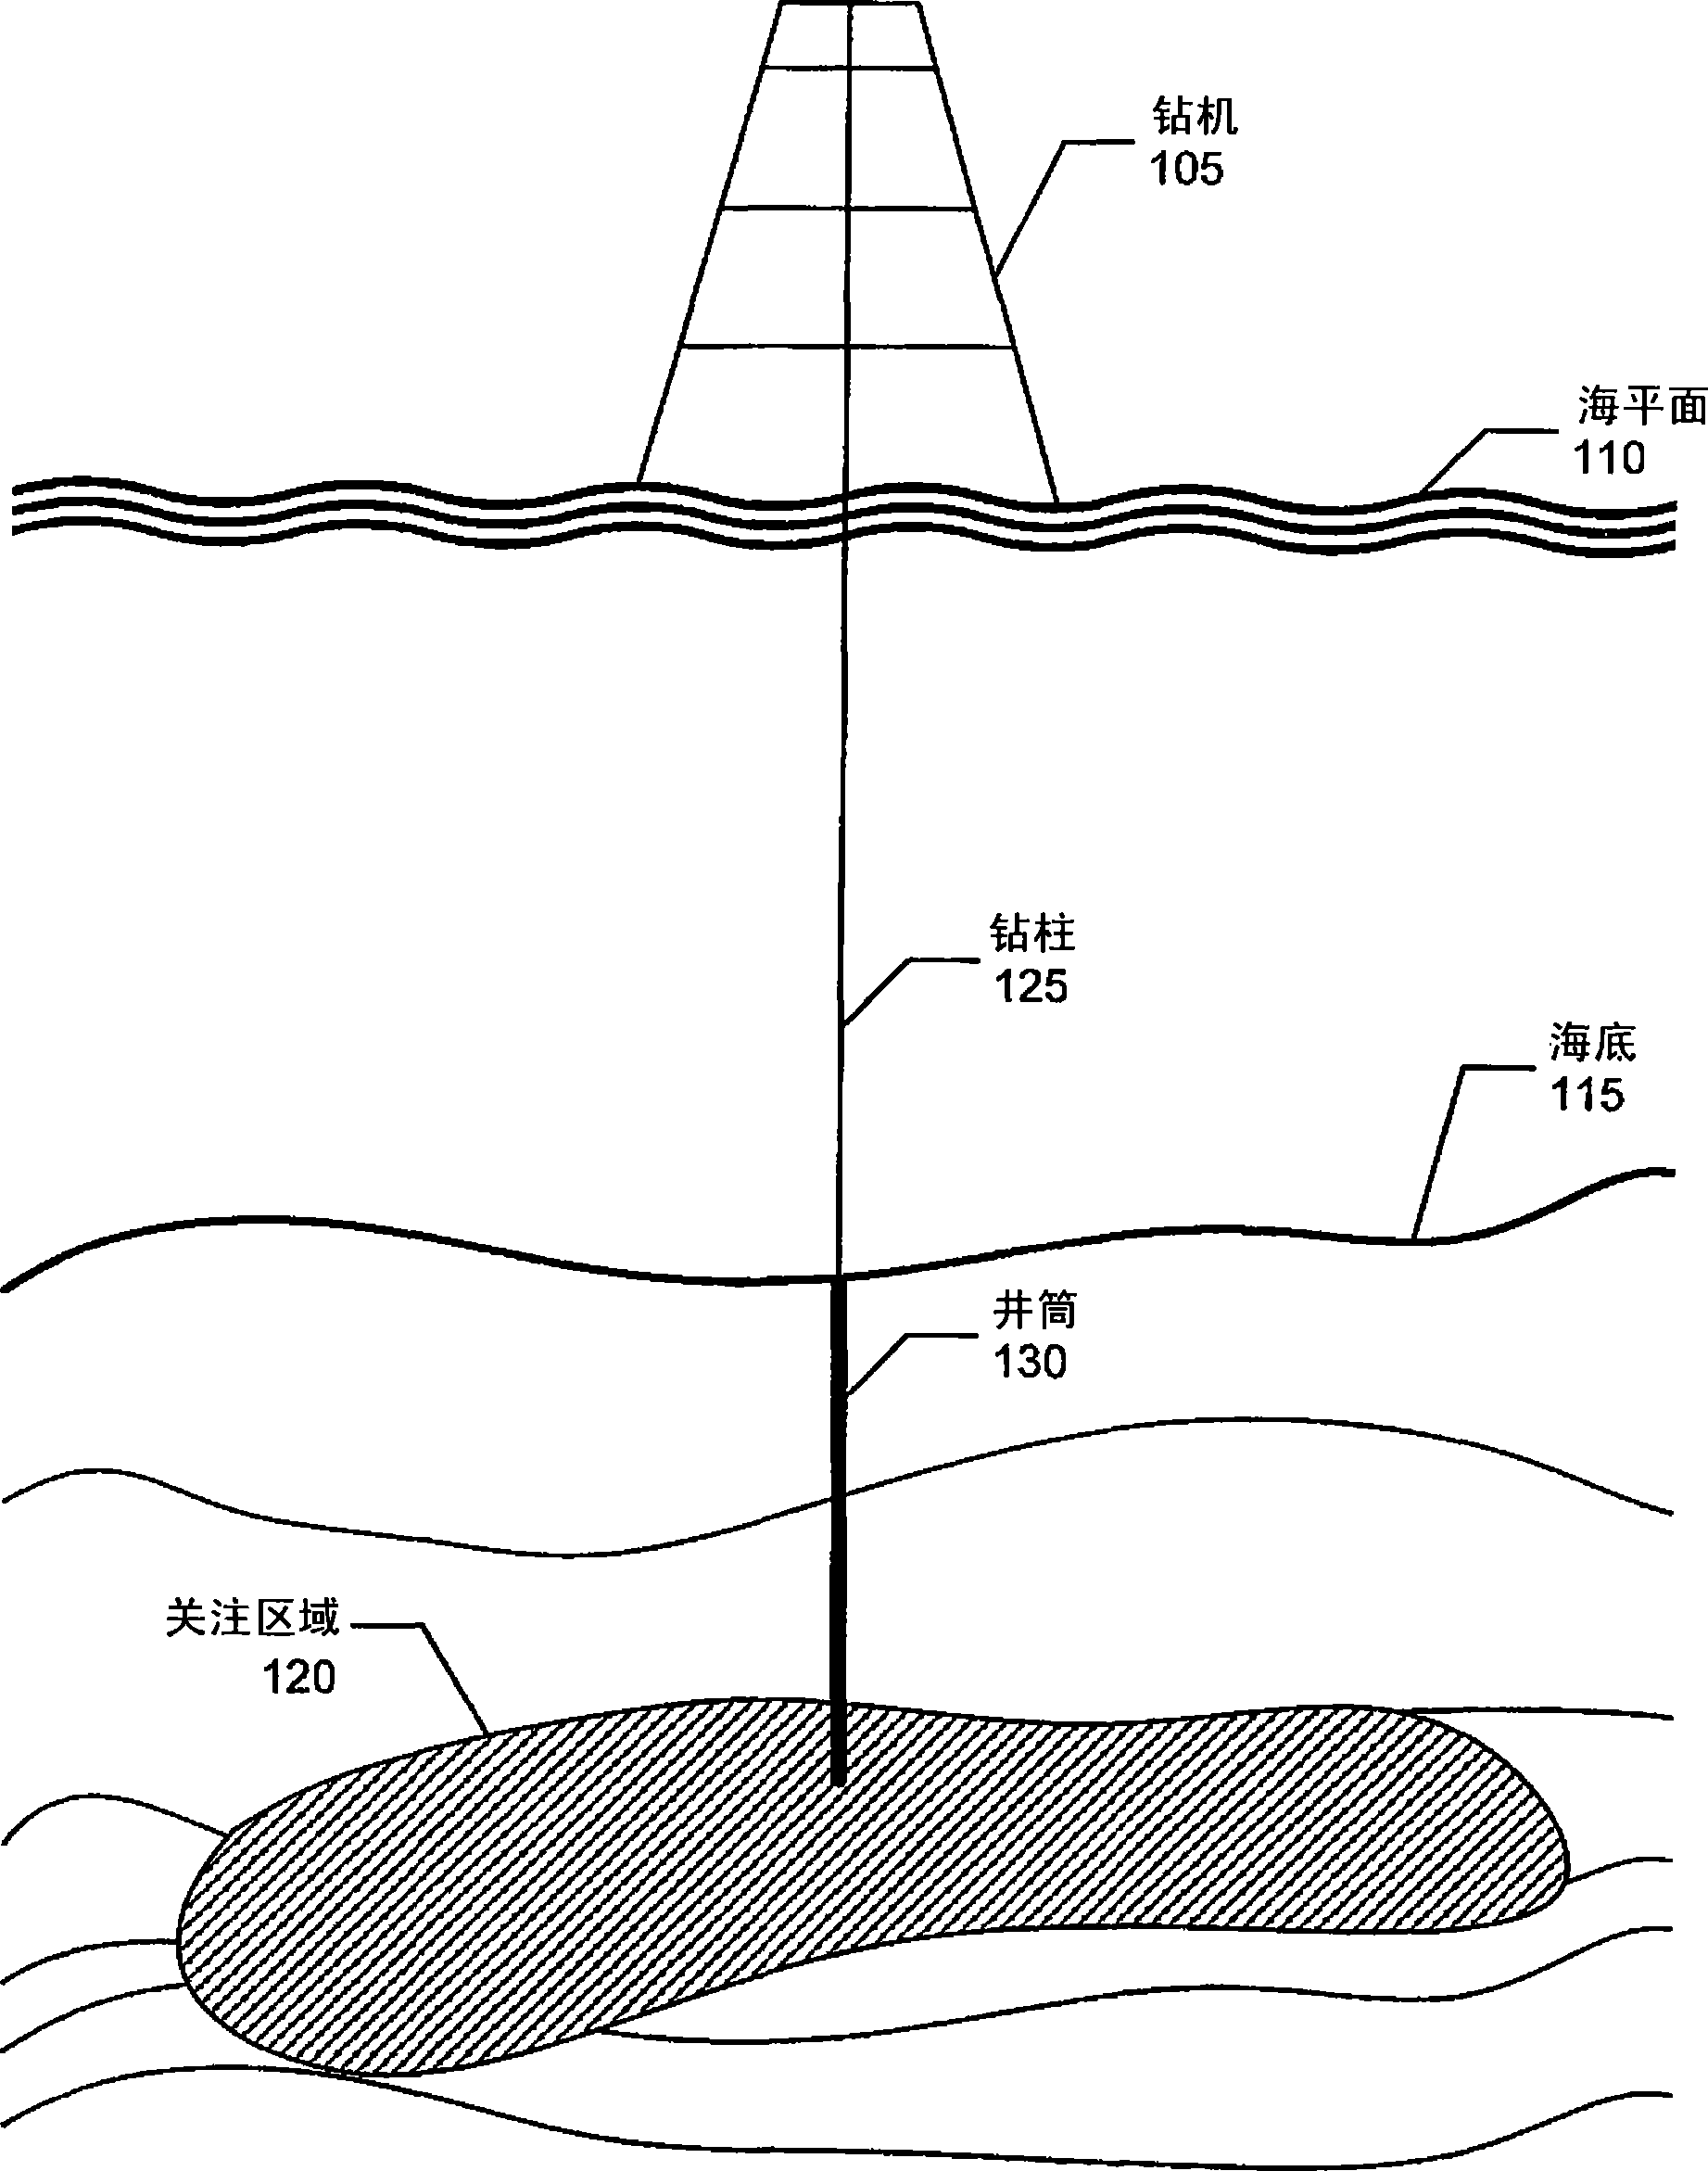 Method and system for pore pressure prediction